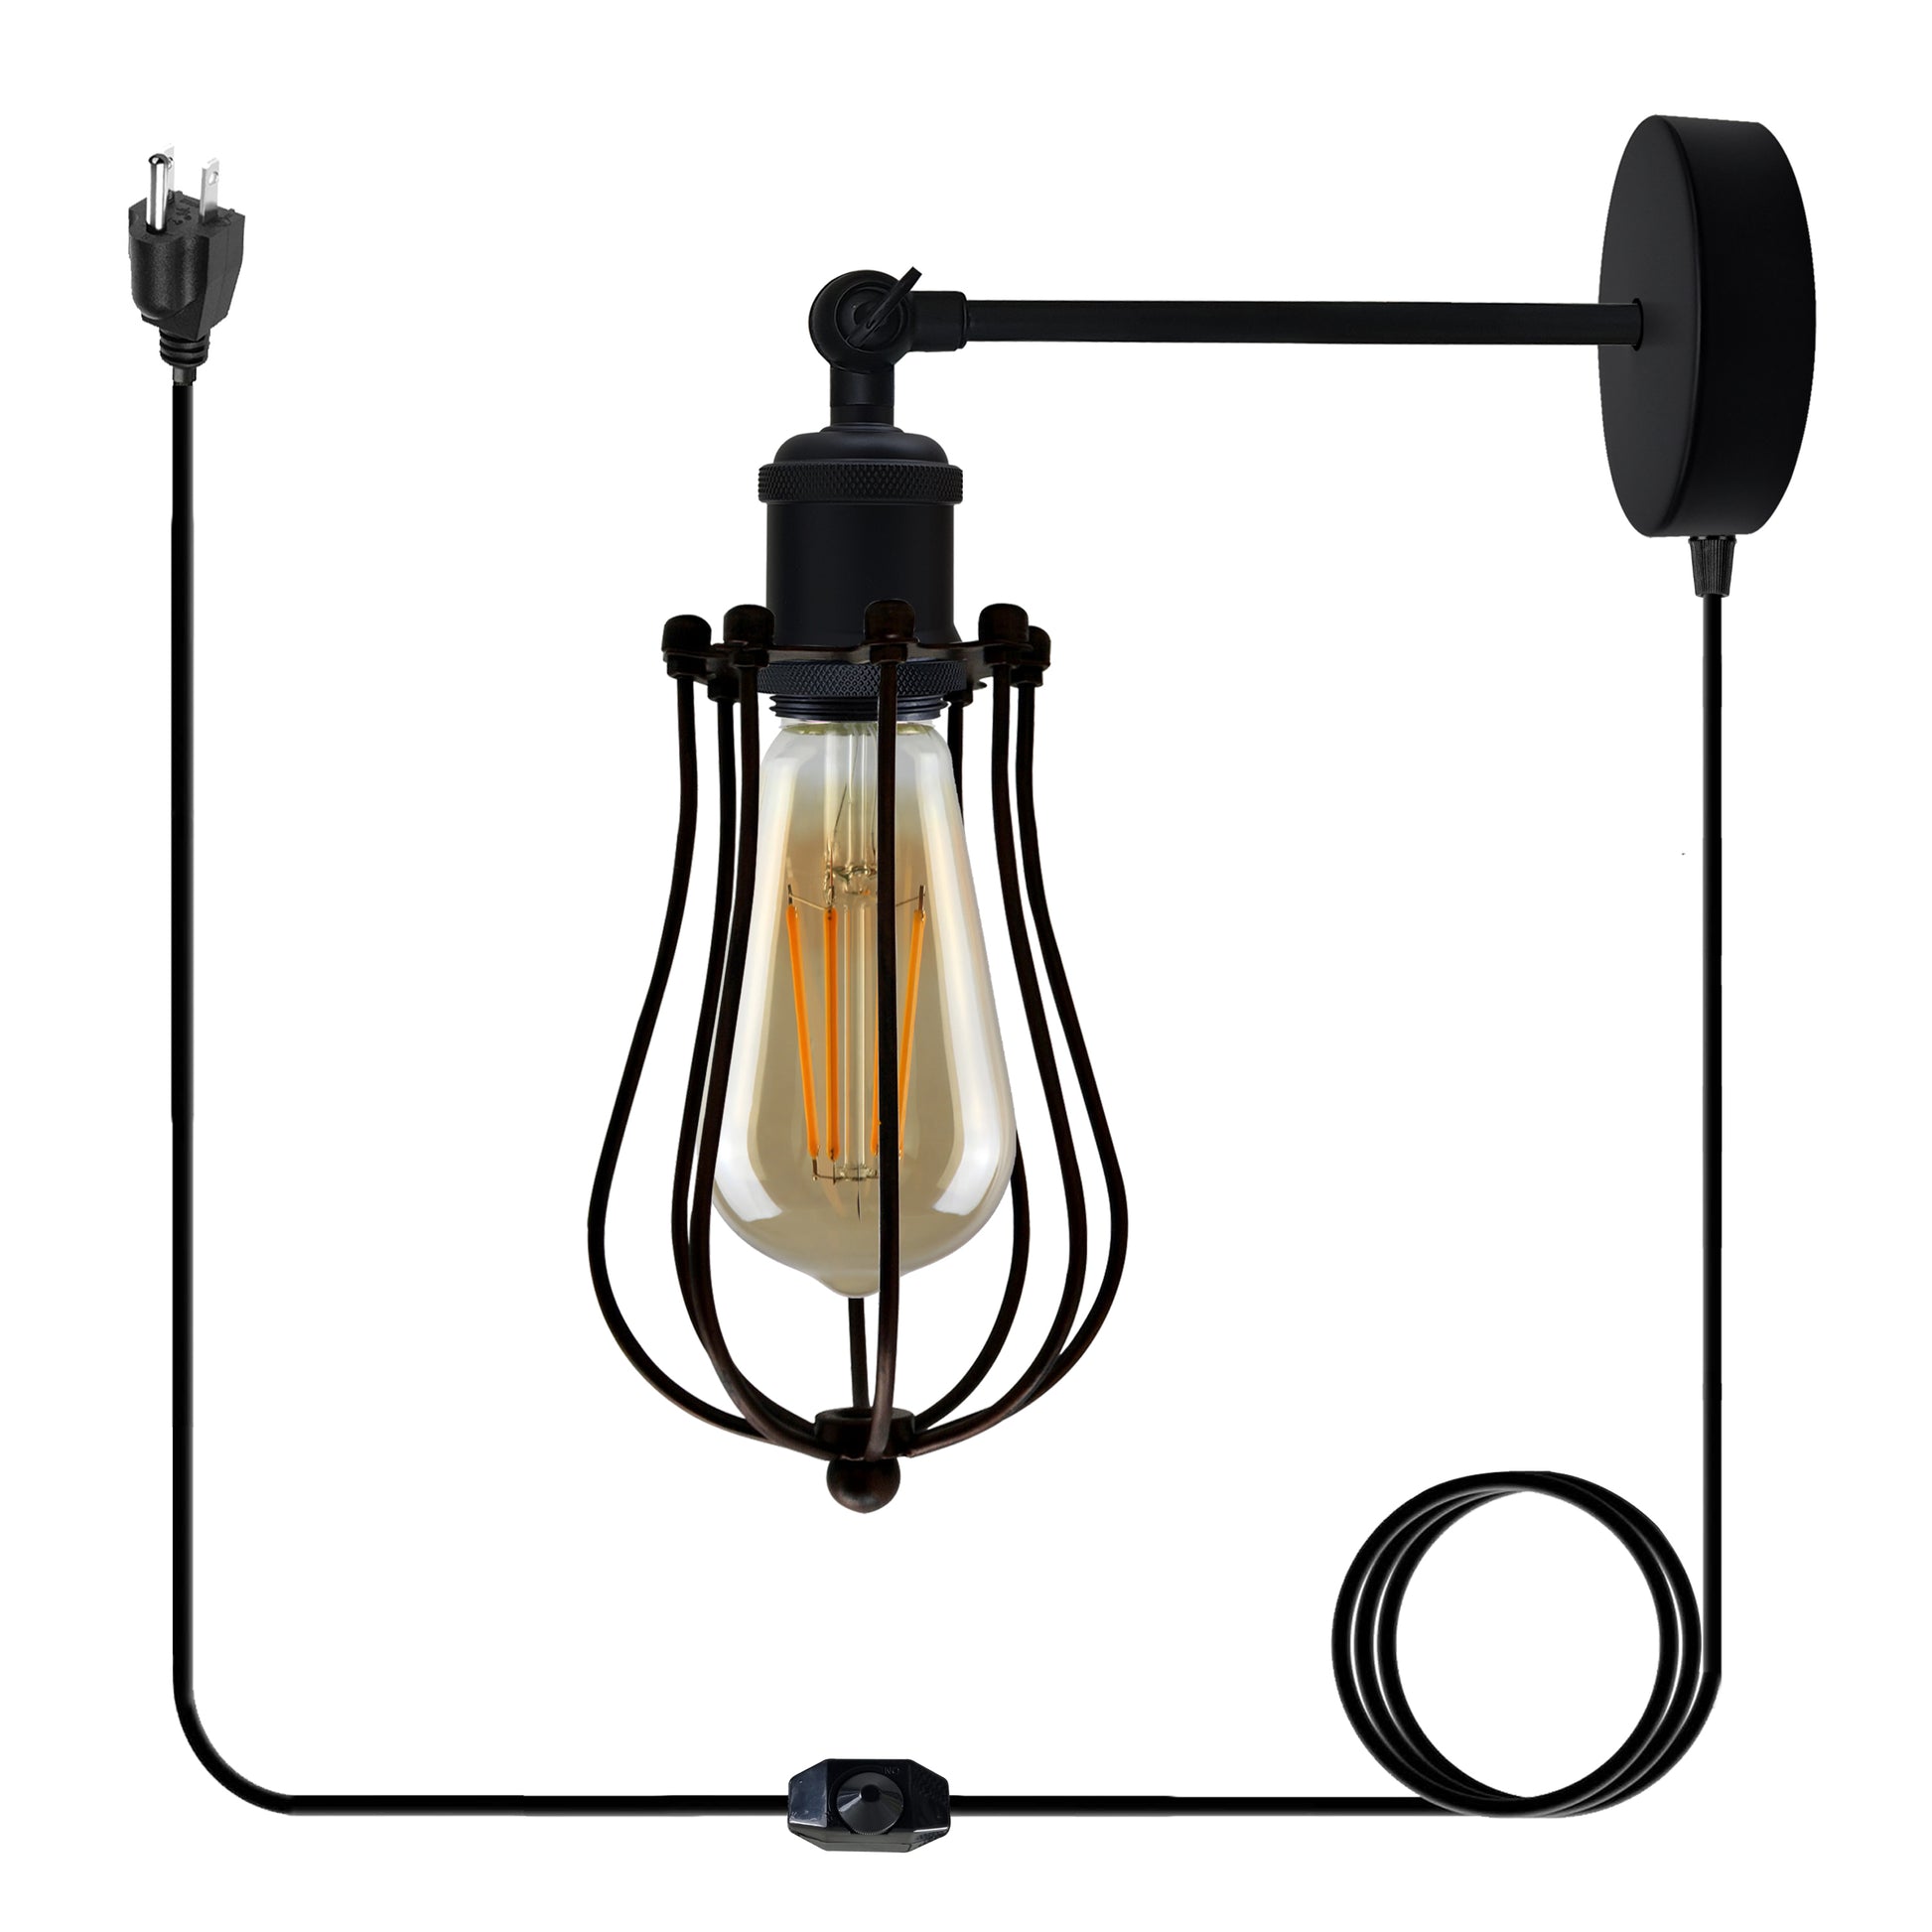  Balloon Wire Cage Plug-in wall Lamp .JPG